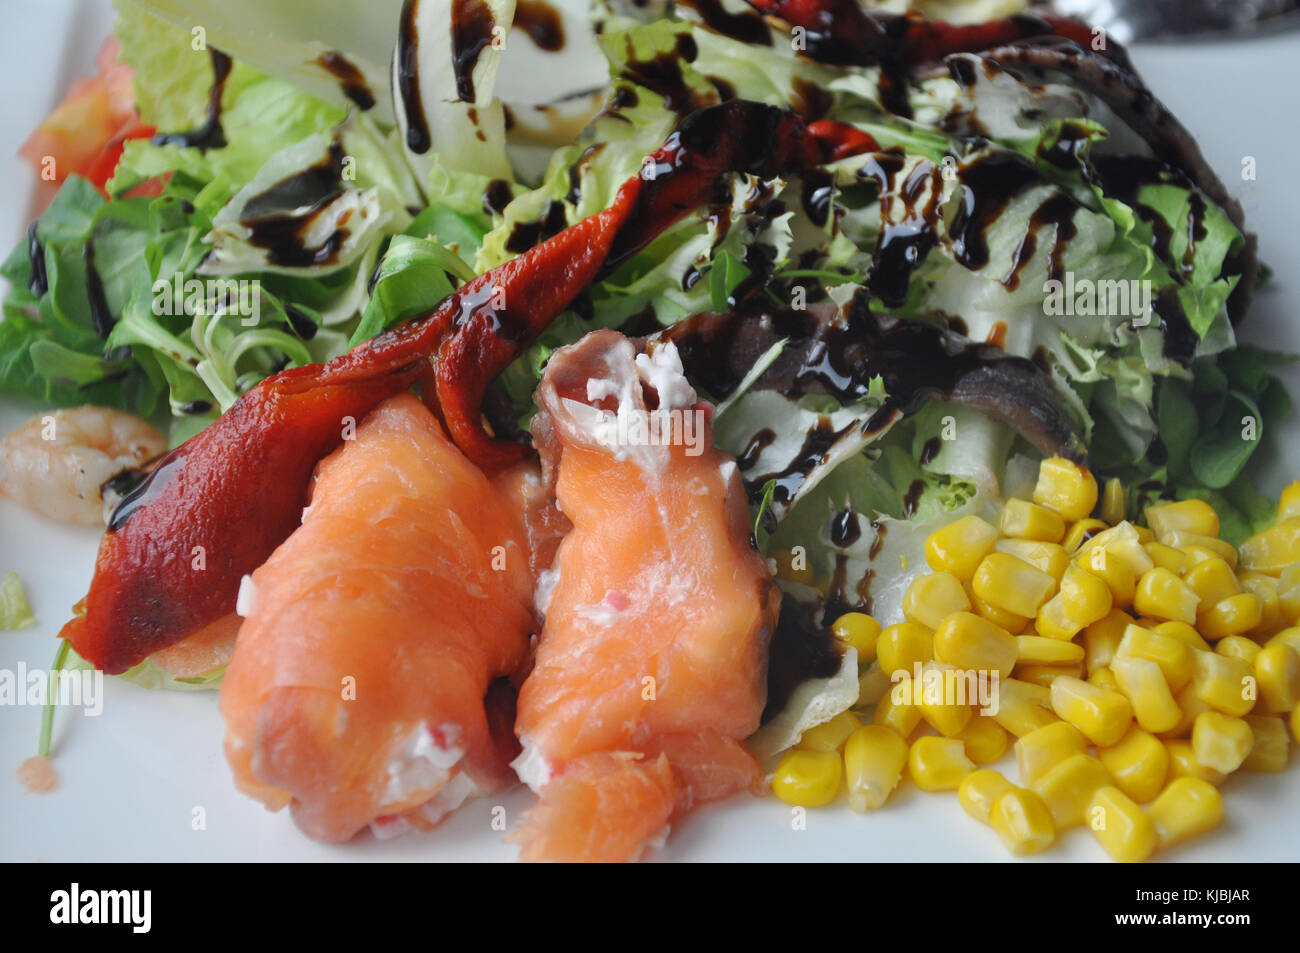 Dressed salad with lettuce and salmon Stock Photo